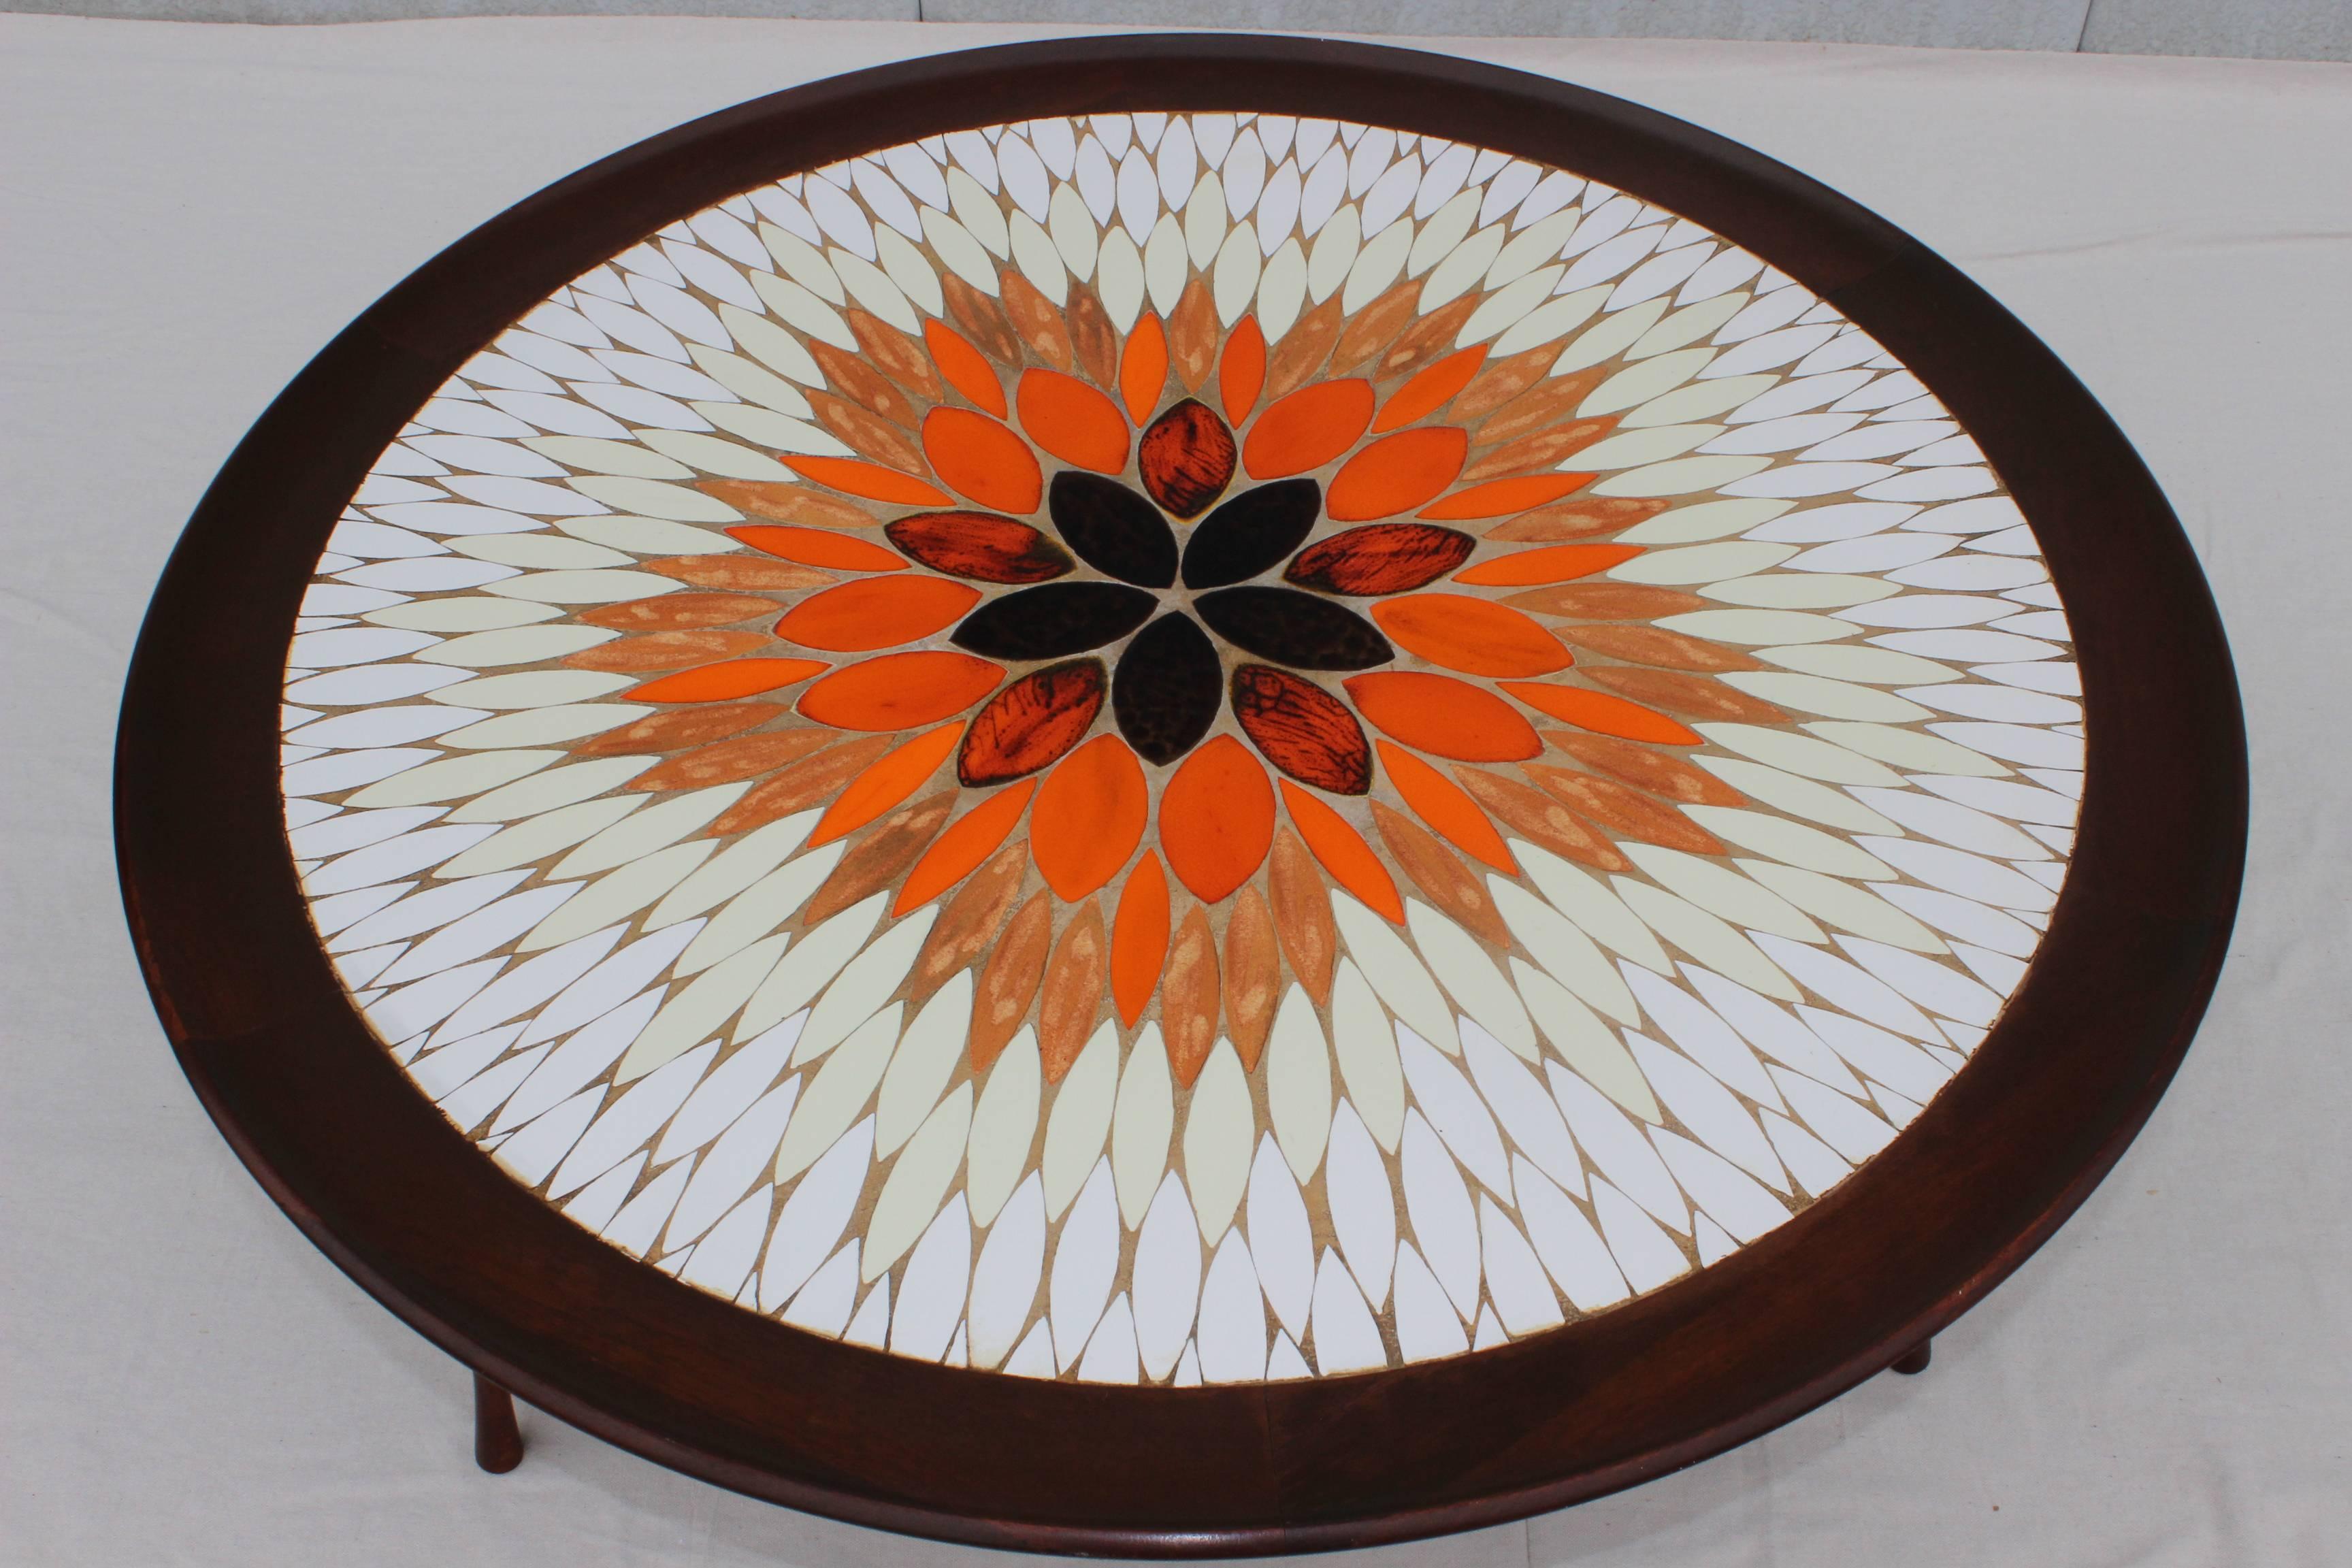 1960s modern Italian mosaic tile and walnut coffee table, with sculptural solid walnut screw on legs.